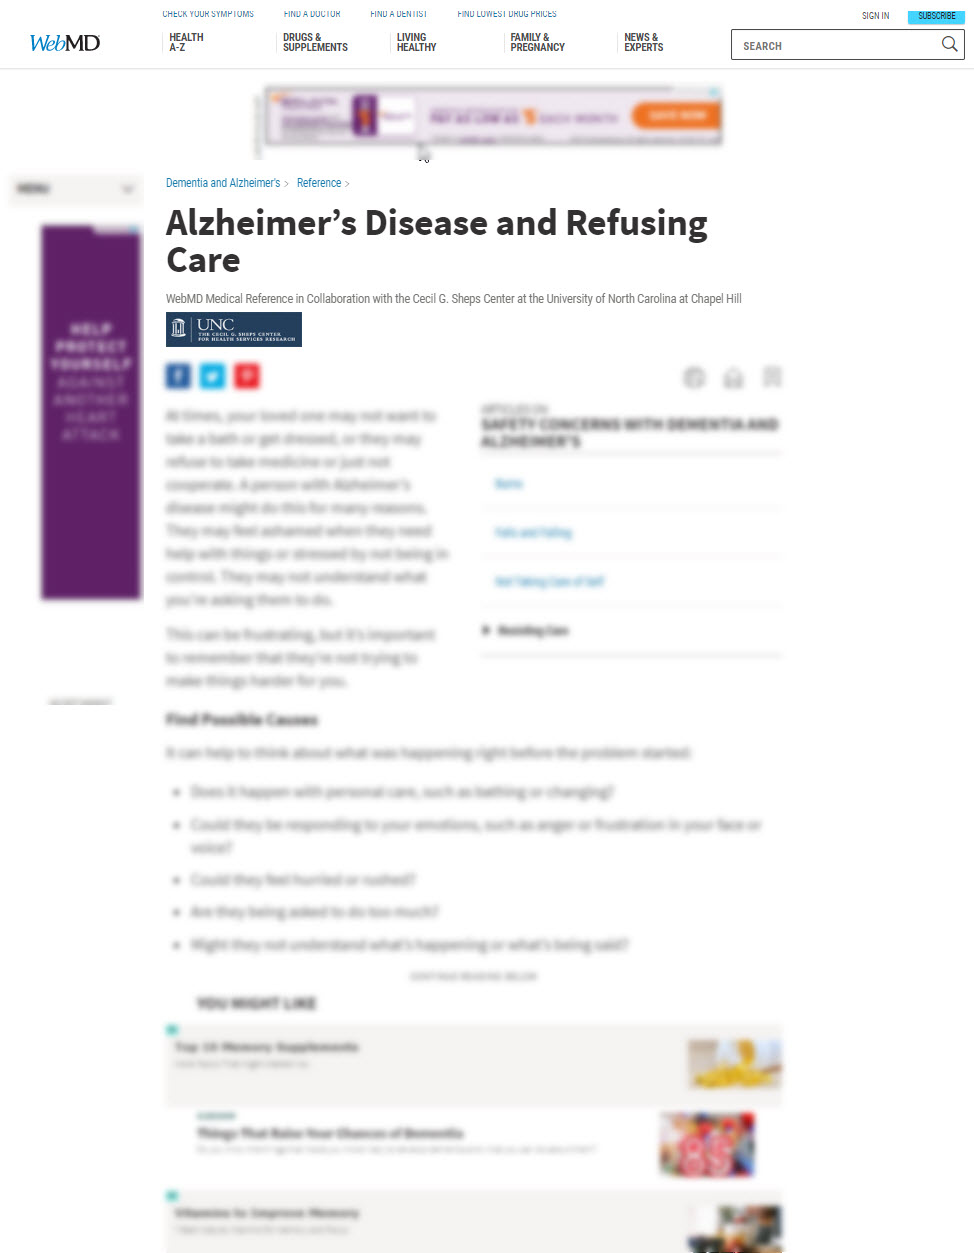 Alzheimer’s Disease and Refusing Care